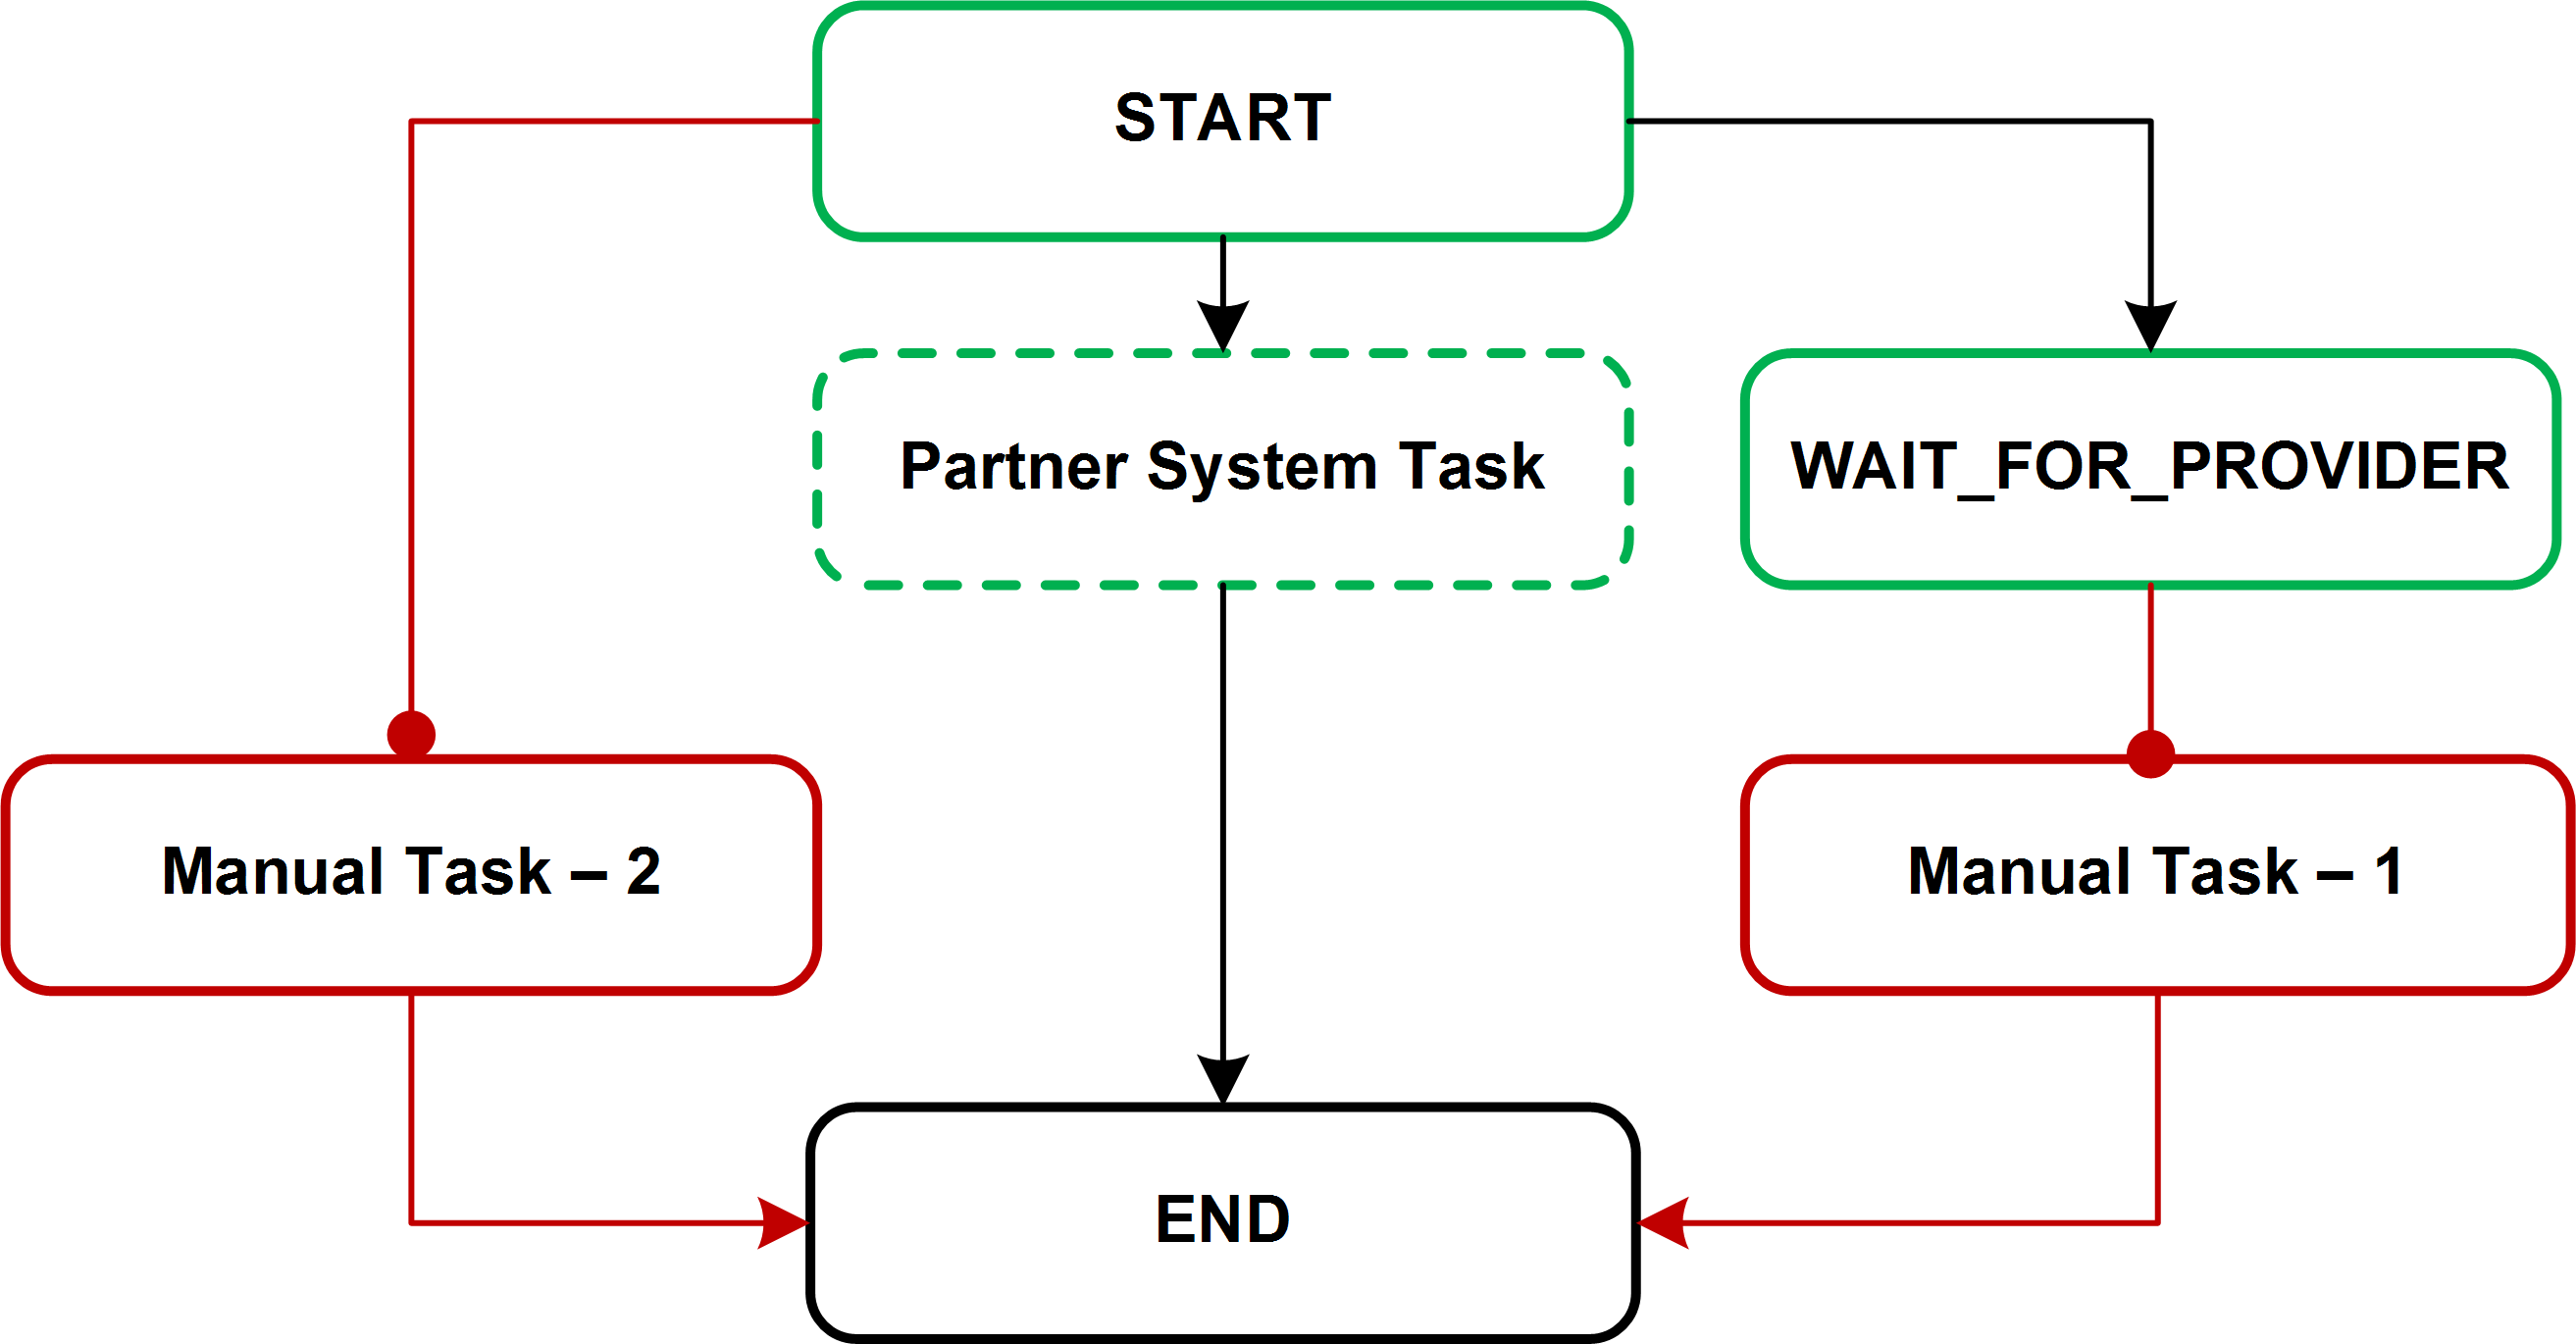 Partners system